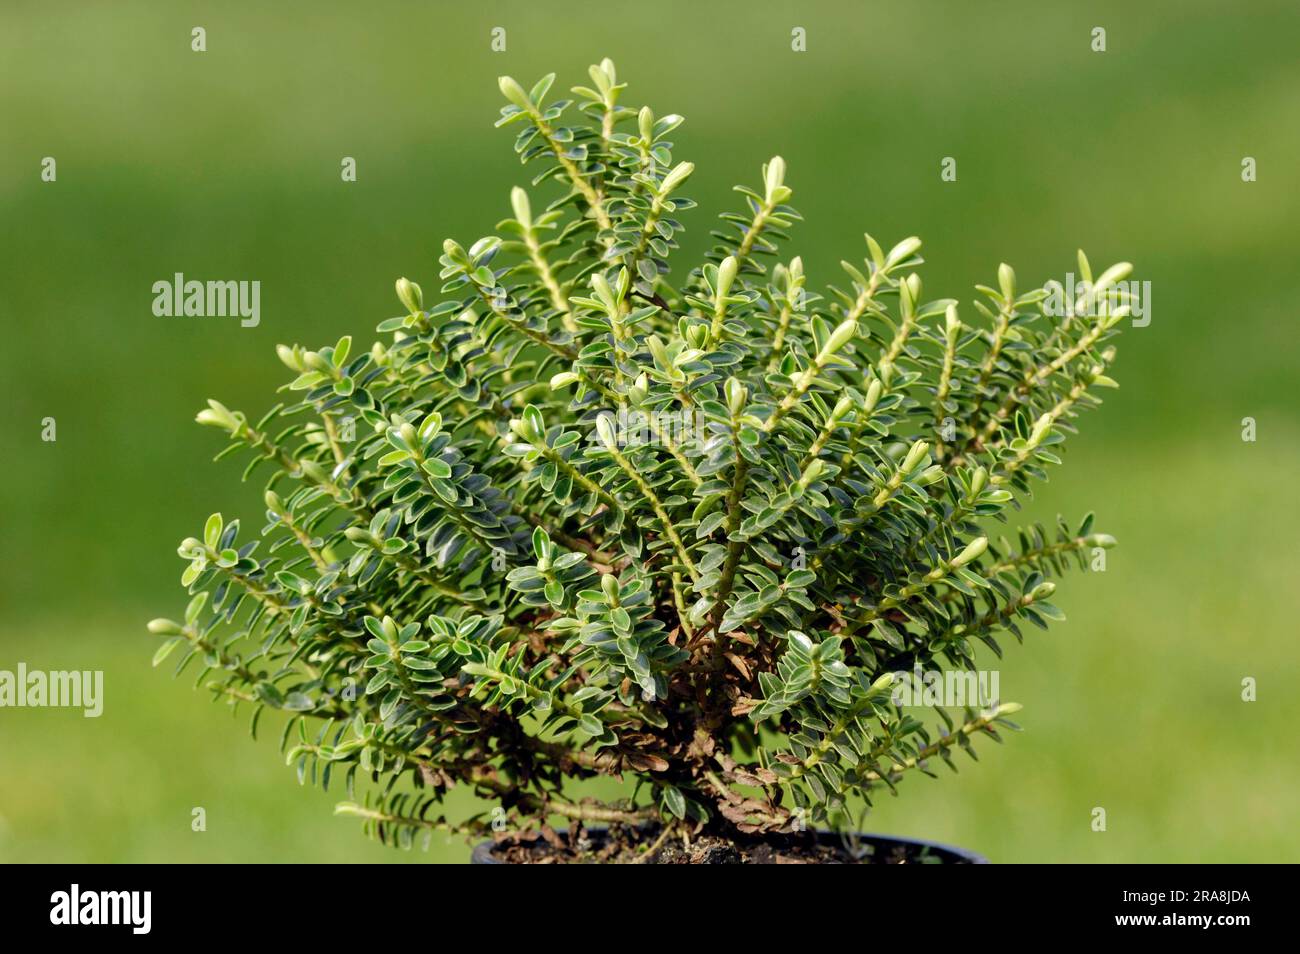 Armstrongs Whipcord (Hebe armstrongii), Armstrongs Hebe, Green Globe Stock Photo